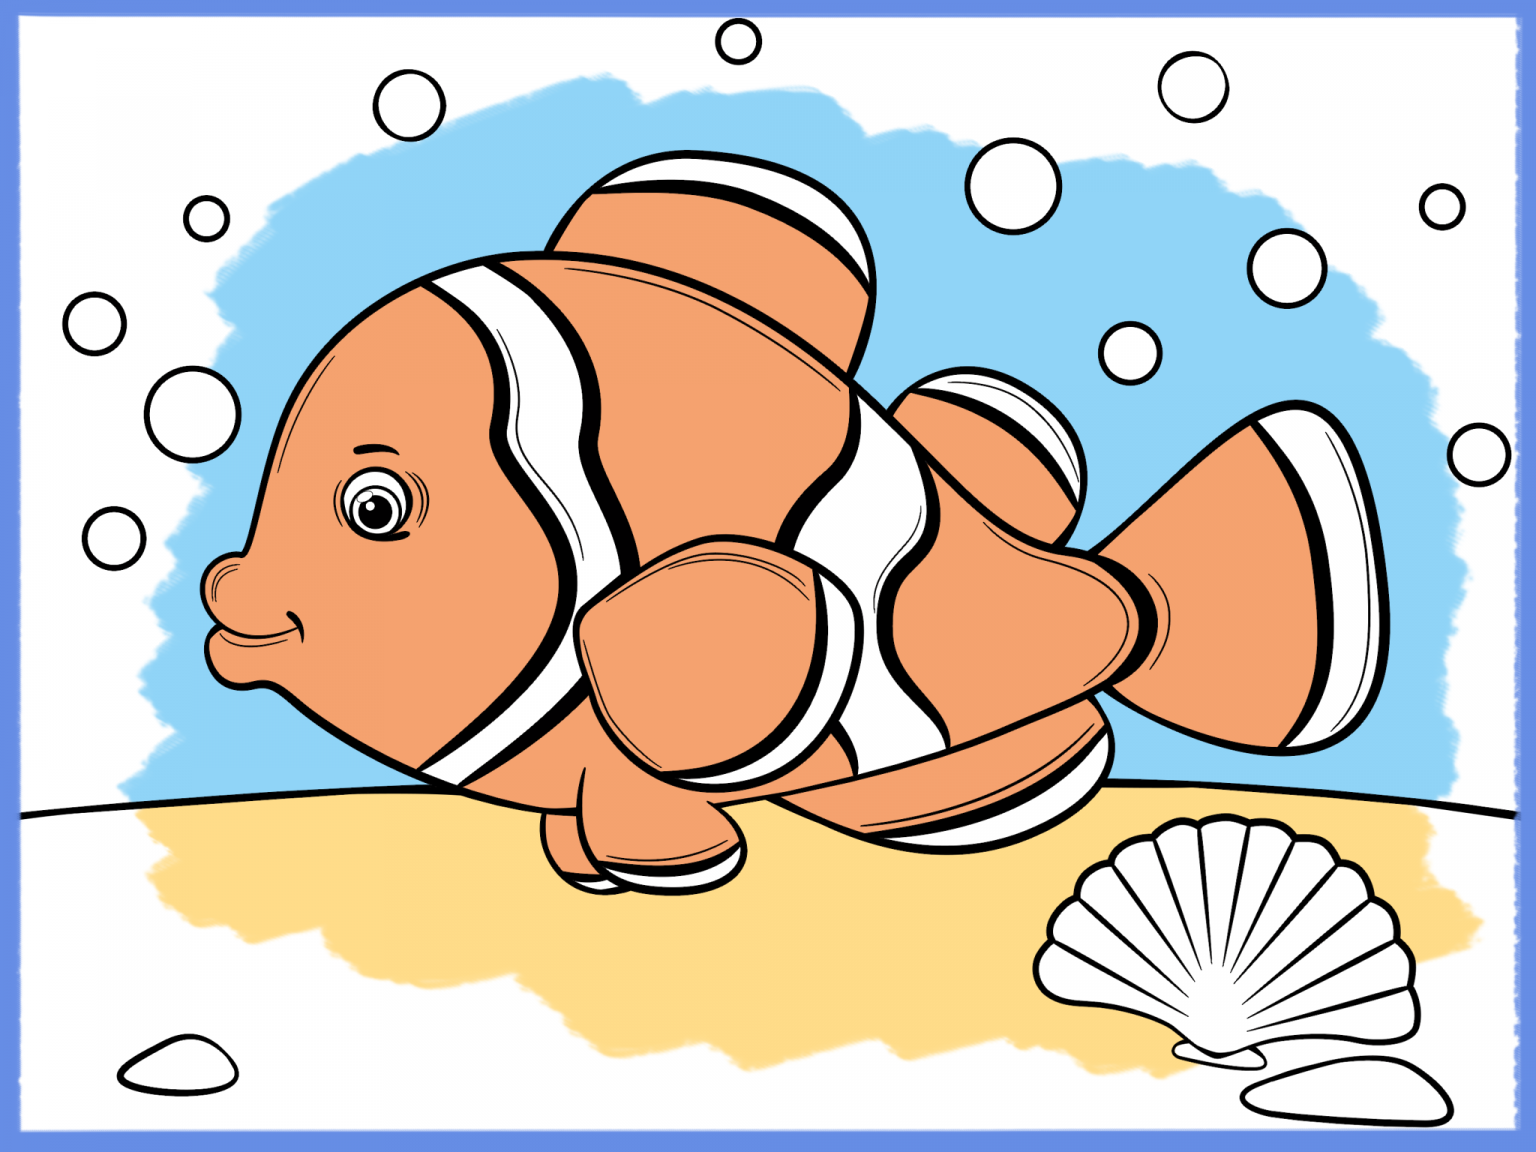 printable-coloring-pages-for-kids-sea-creatures-amax-kids